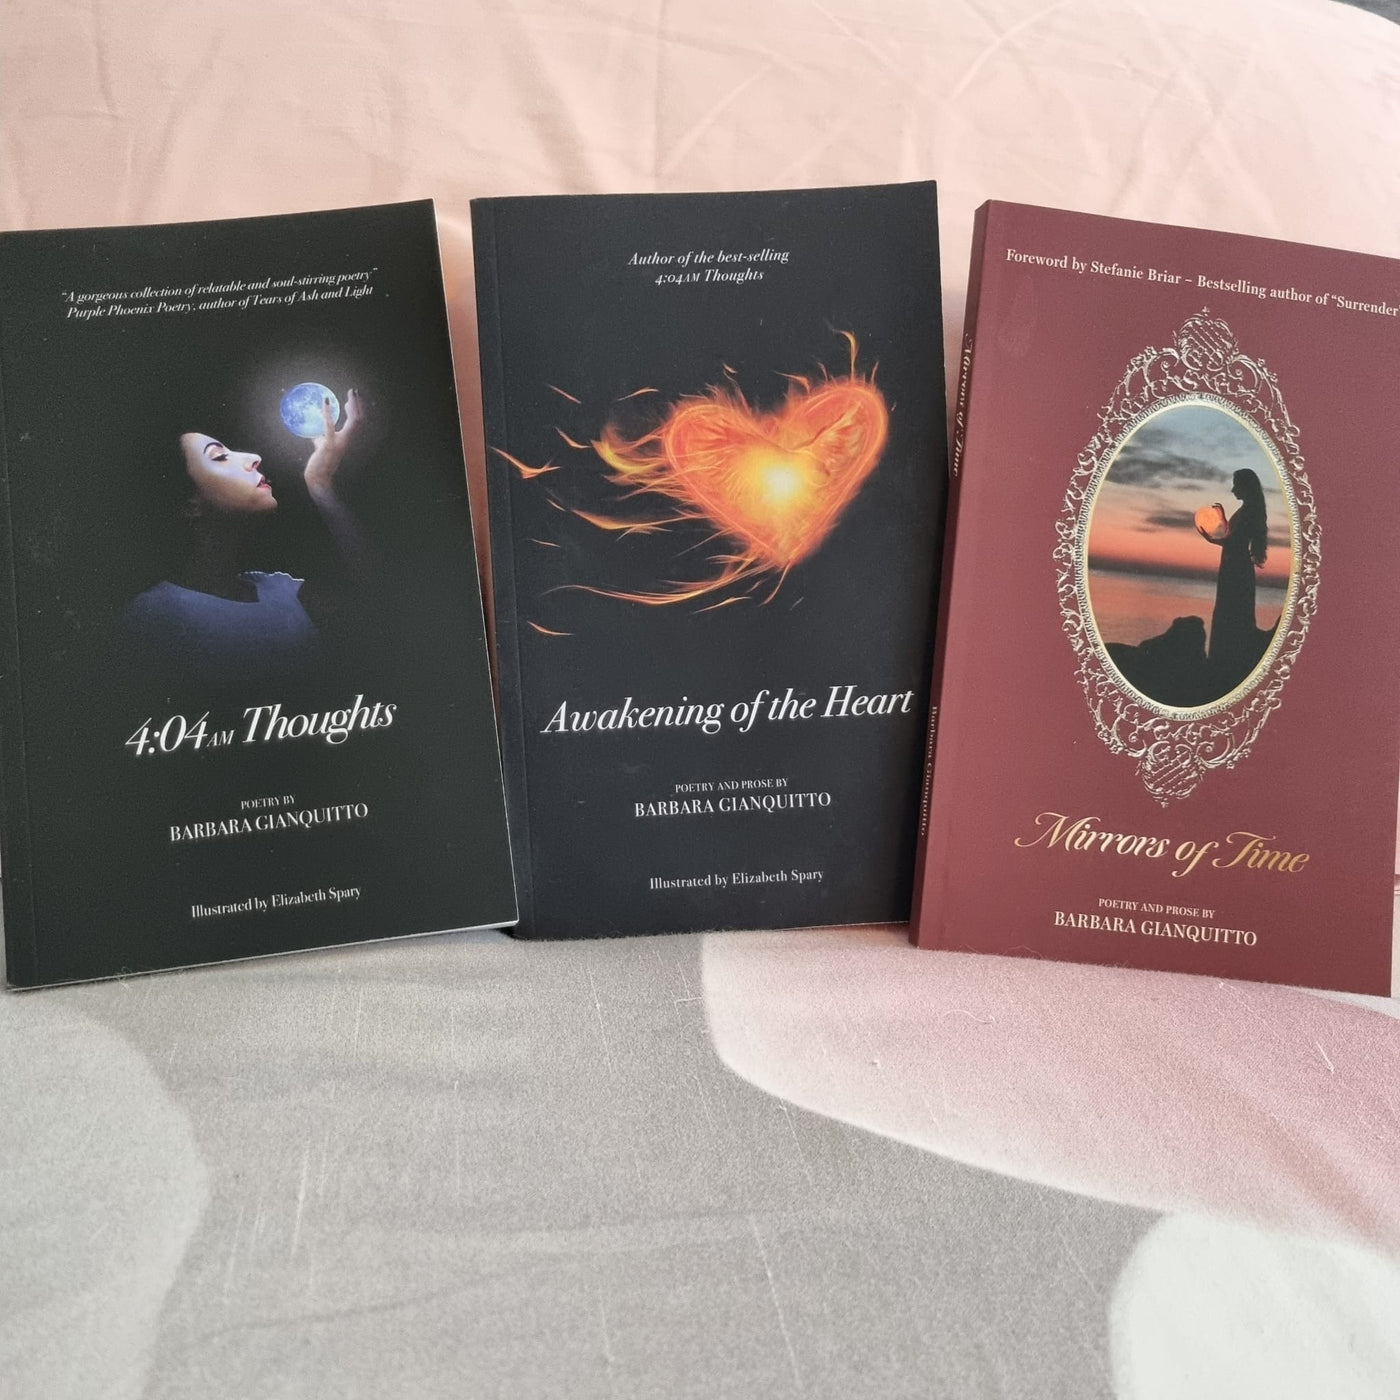 The complete signed poetry collection